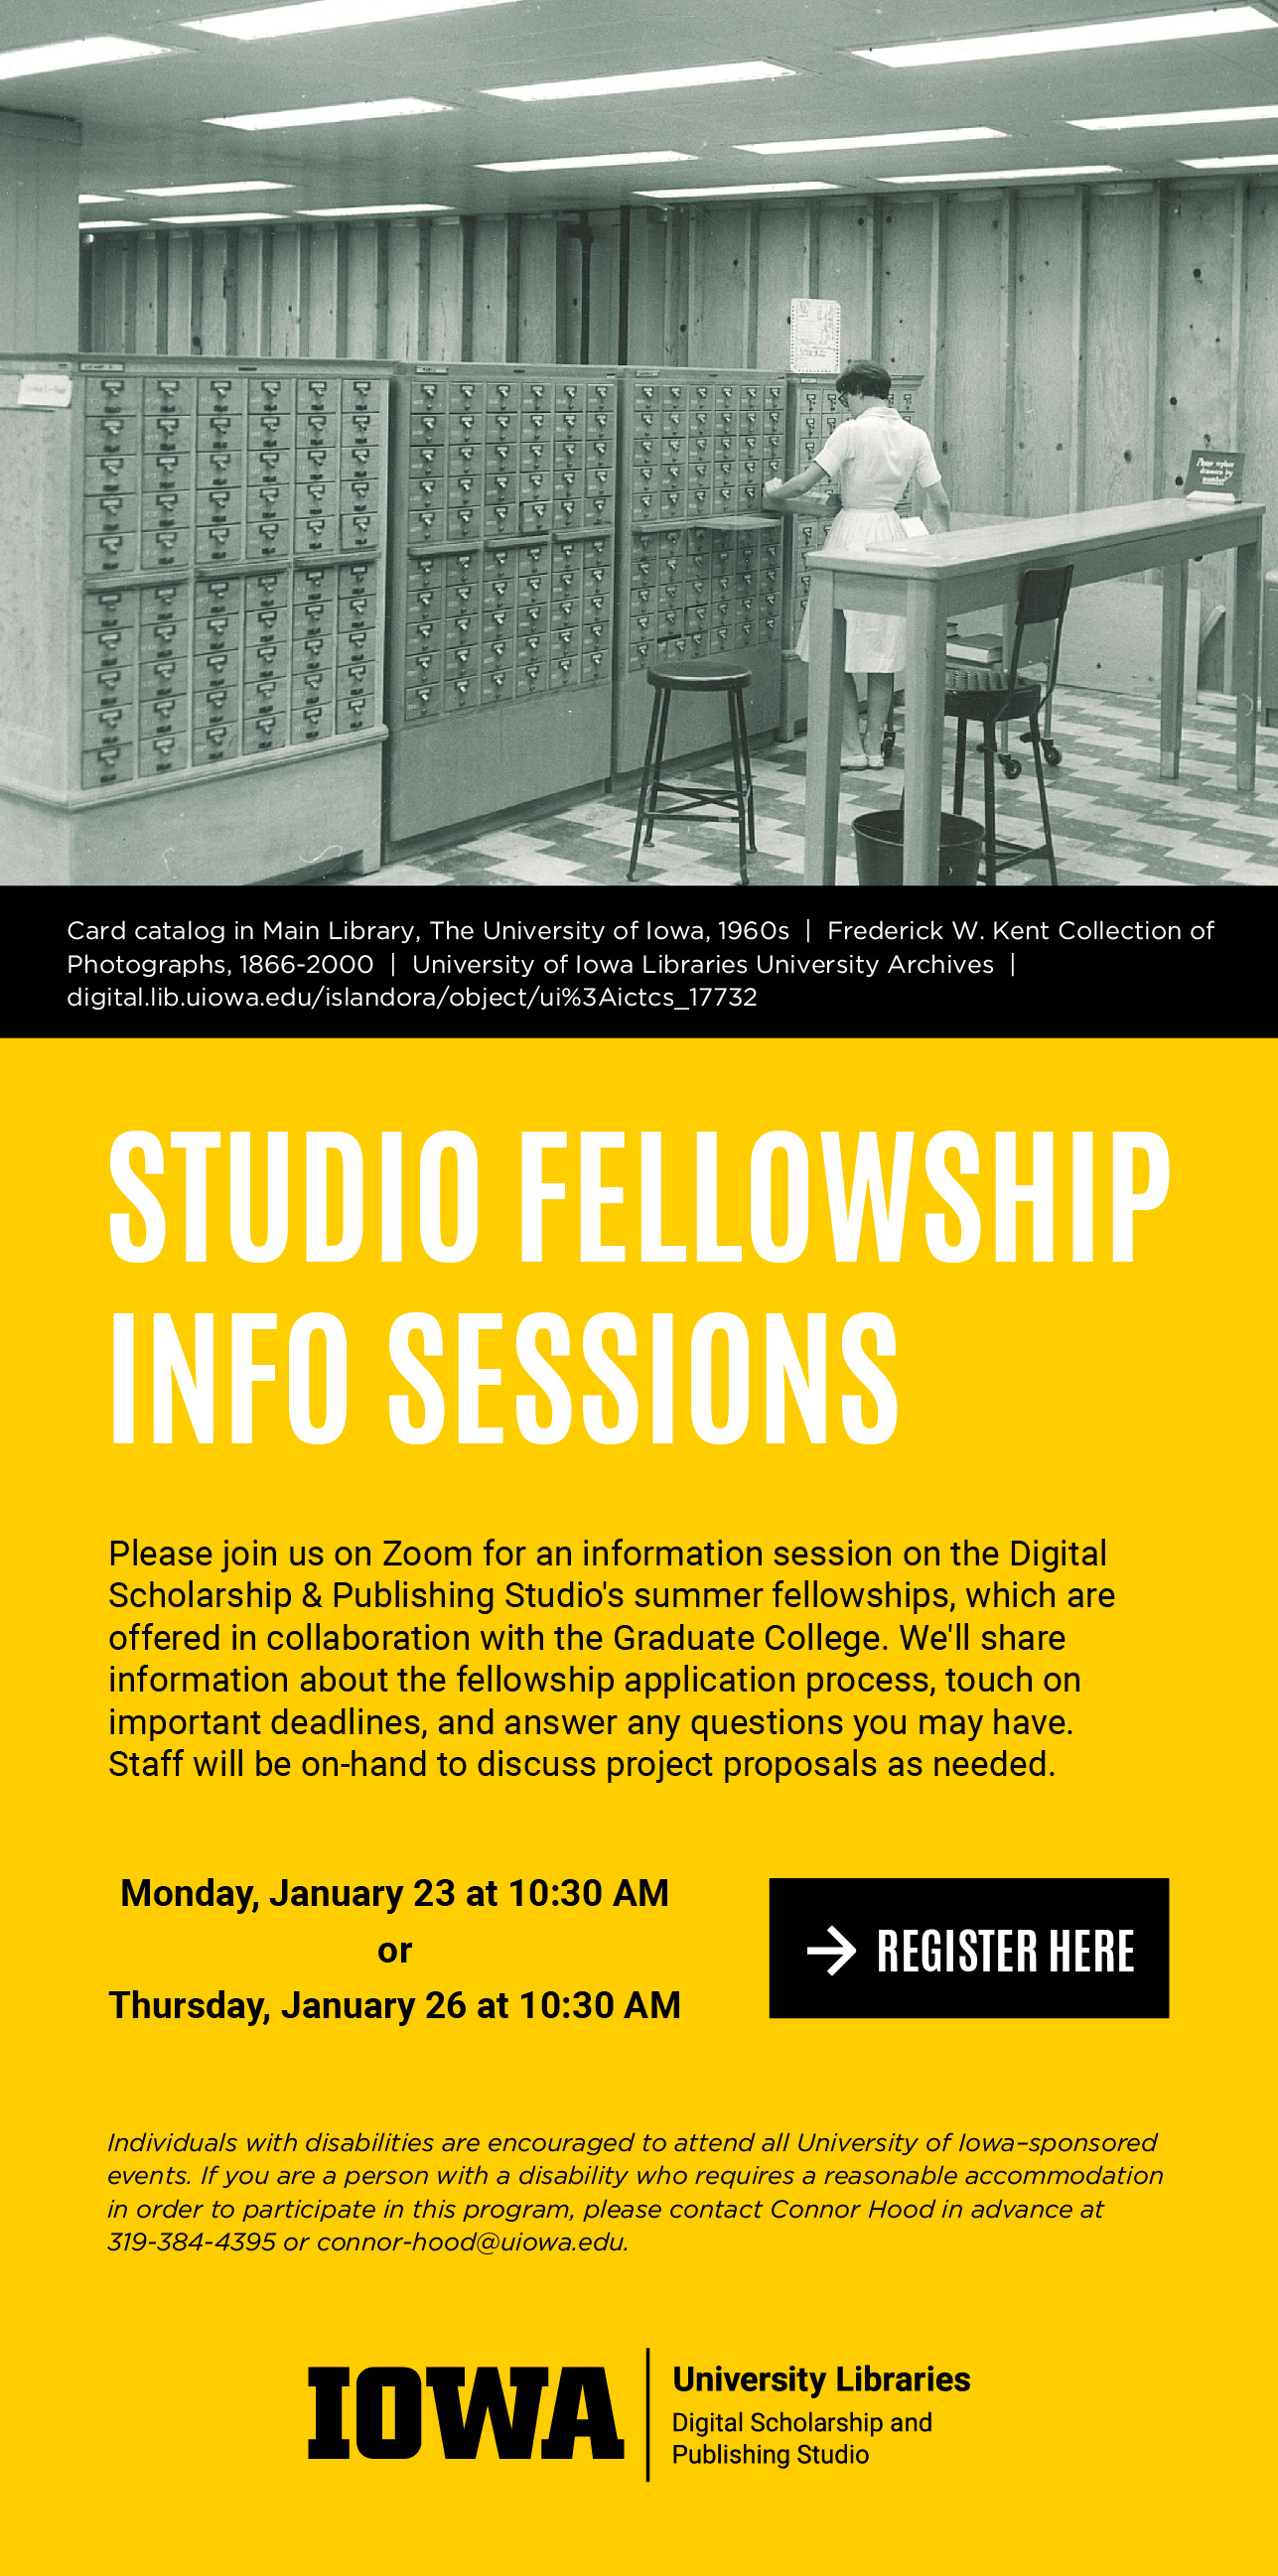 Studio Fellowship Info Sessions. Please join us virtually on Zoom Monday, January 23rd at 10:30am or Thursday, January 26th at 10:30am for an information session on the Digital Scholarship & Publishing Studio's summer fellowships, which are offered in col